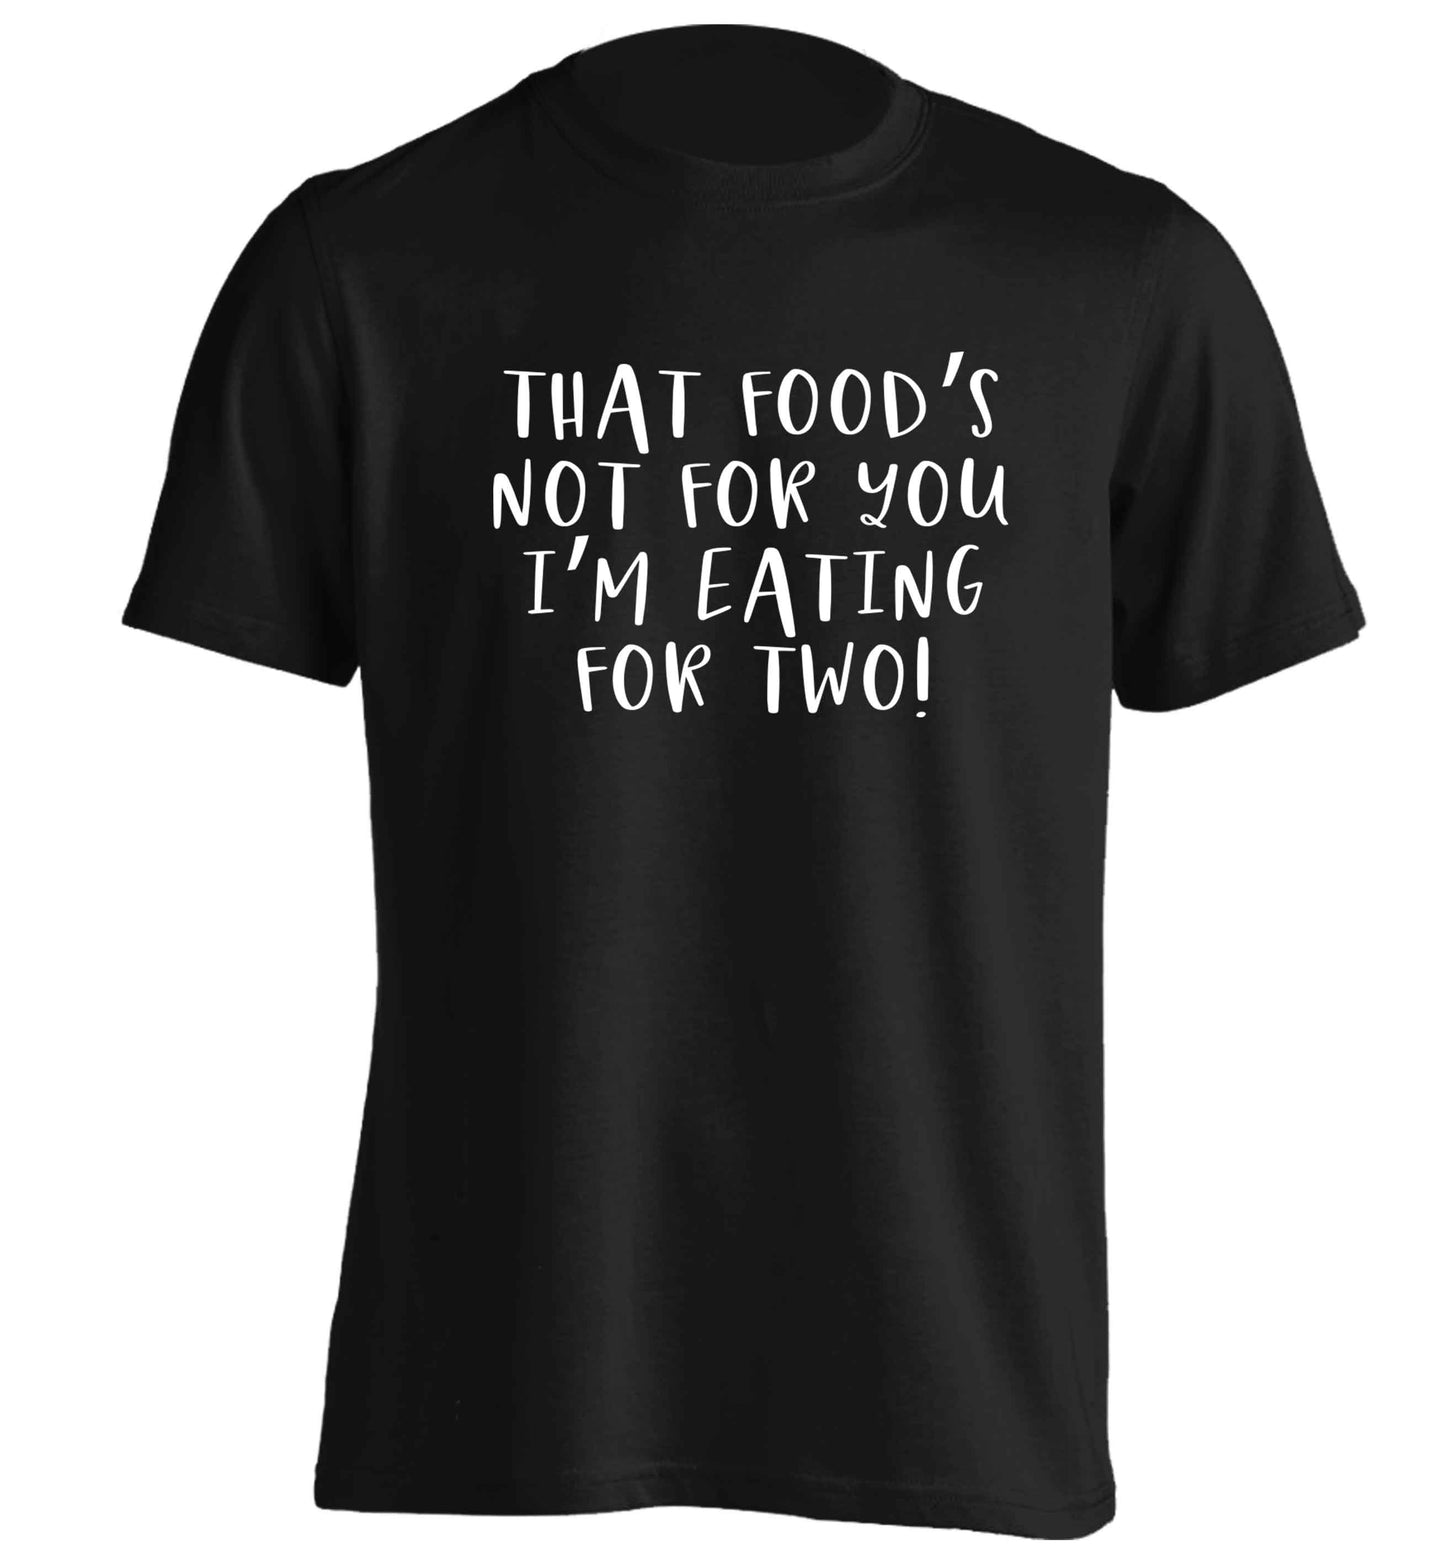 That food's not for you I'm eating for two adults unisex black Tshirt 2XL